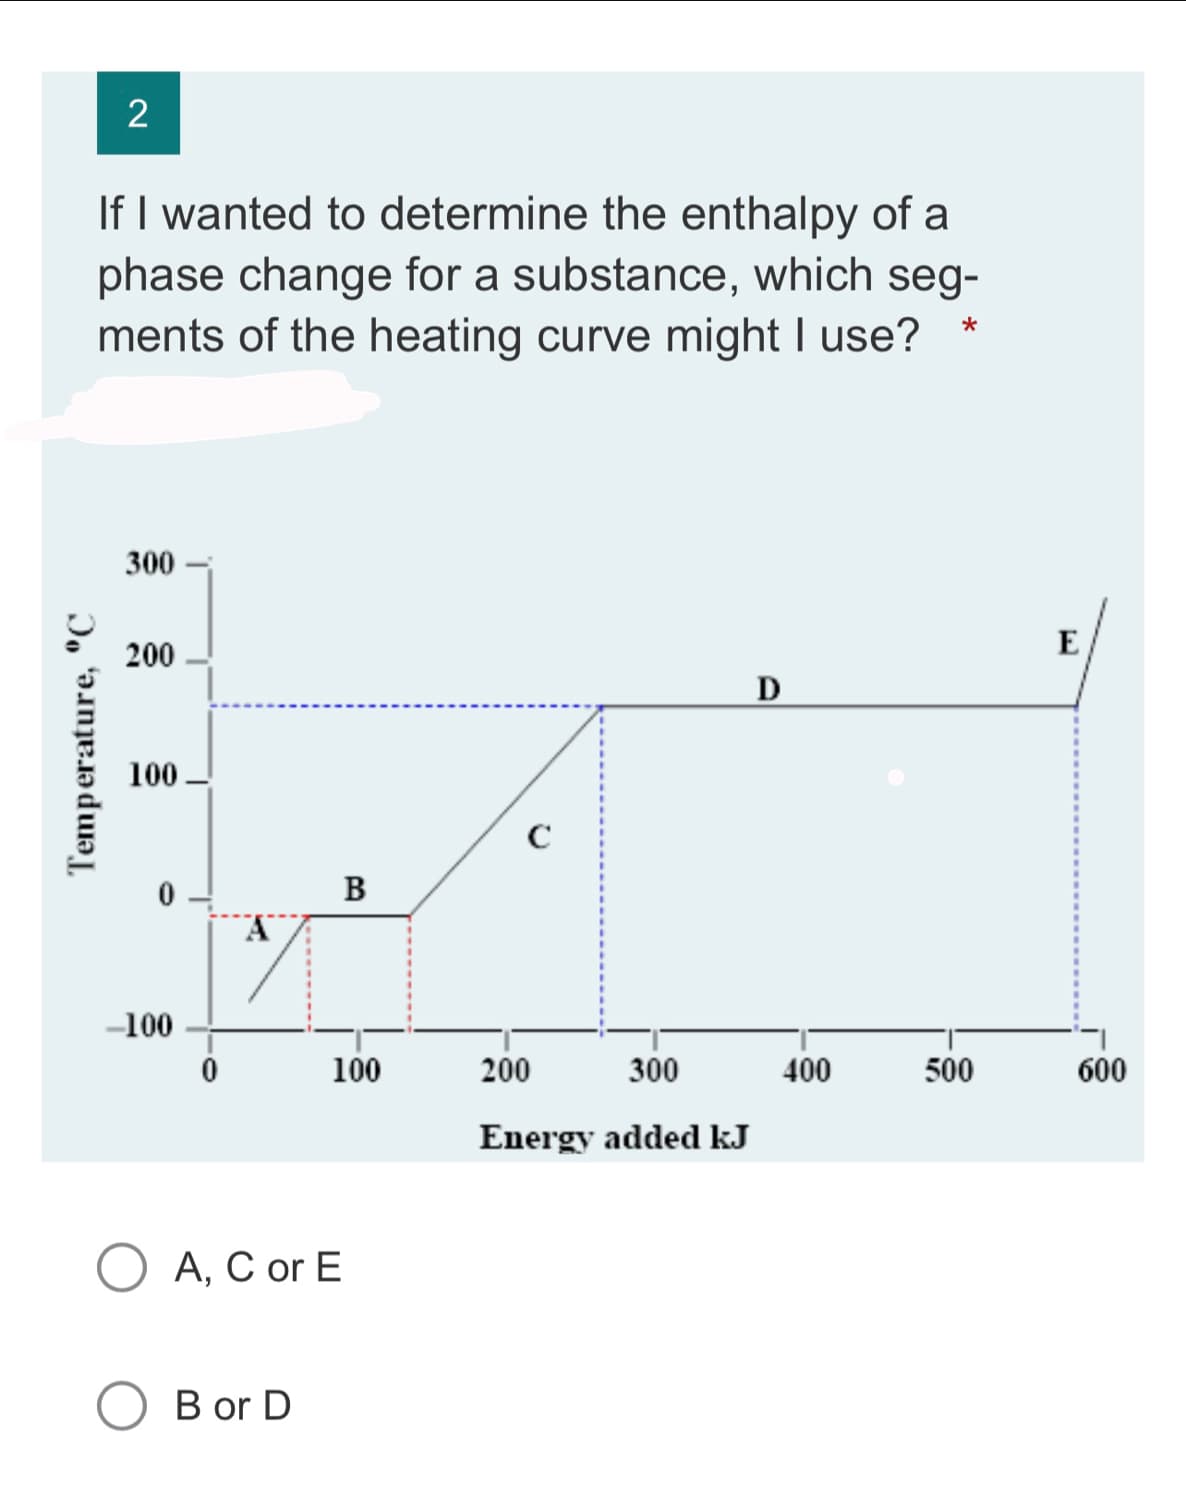 Temperature, °C
2
If I wanted to determine the enthalpy of a
phase change for a substance, which seg-
ments of the heating curve might I use?
300
200
100.
0
-100
0
A
A, C or E
B or D
B
100
с
200
300
Energy added kJ
D
400
*
500
E
600